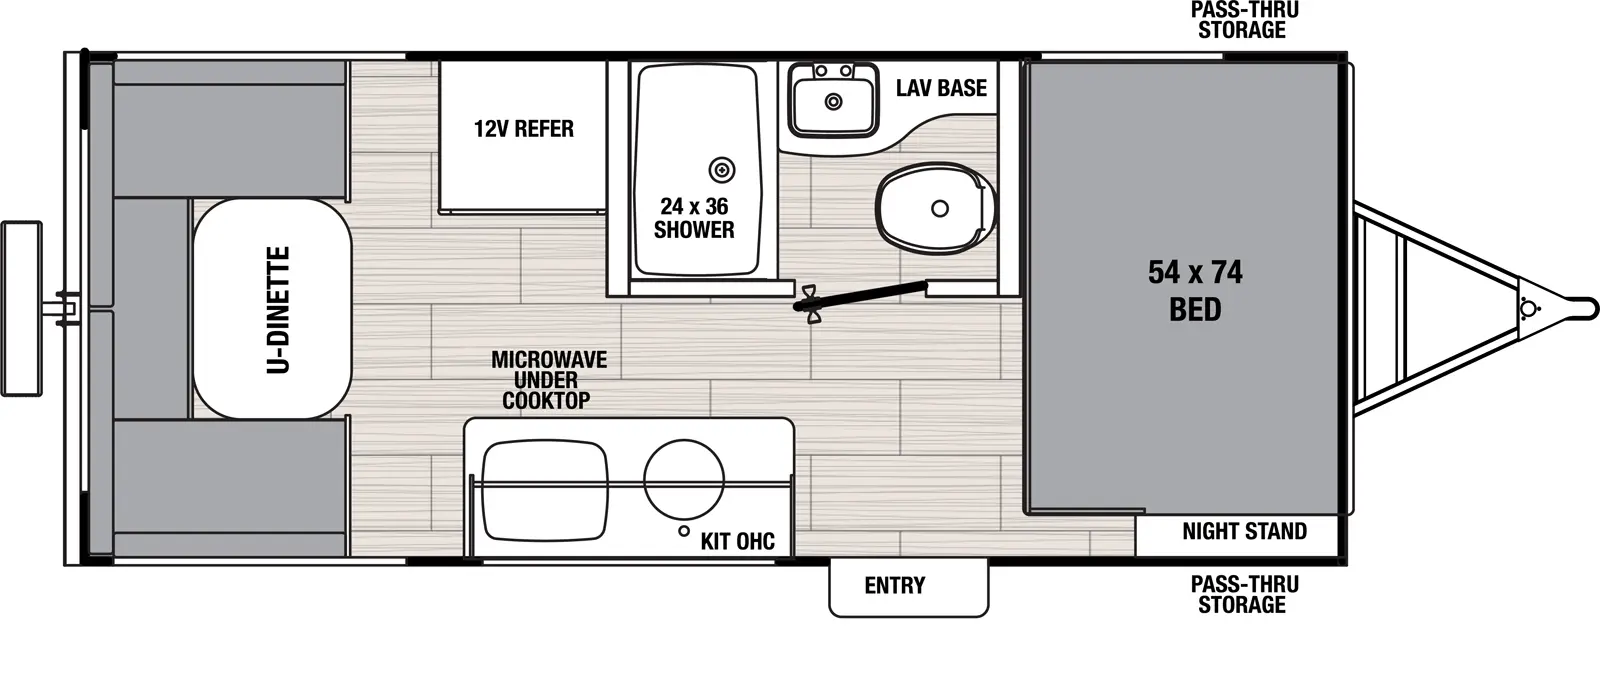 The 16RDB has zero slideouts and one entry. Exterior features front pass-through storage. Interior layout front to back: side-facing bed with door side nightstand; off-door side full bathroom; door side entry, kitchen counter with overhead cabinet and microwave under cooktop; off-door side 12V refrigerator; rear u-dinette.